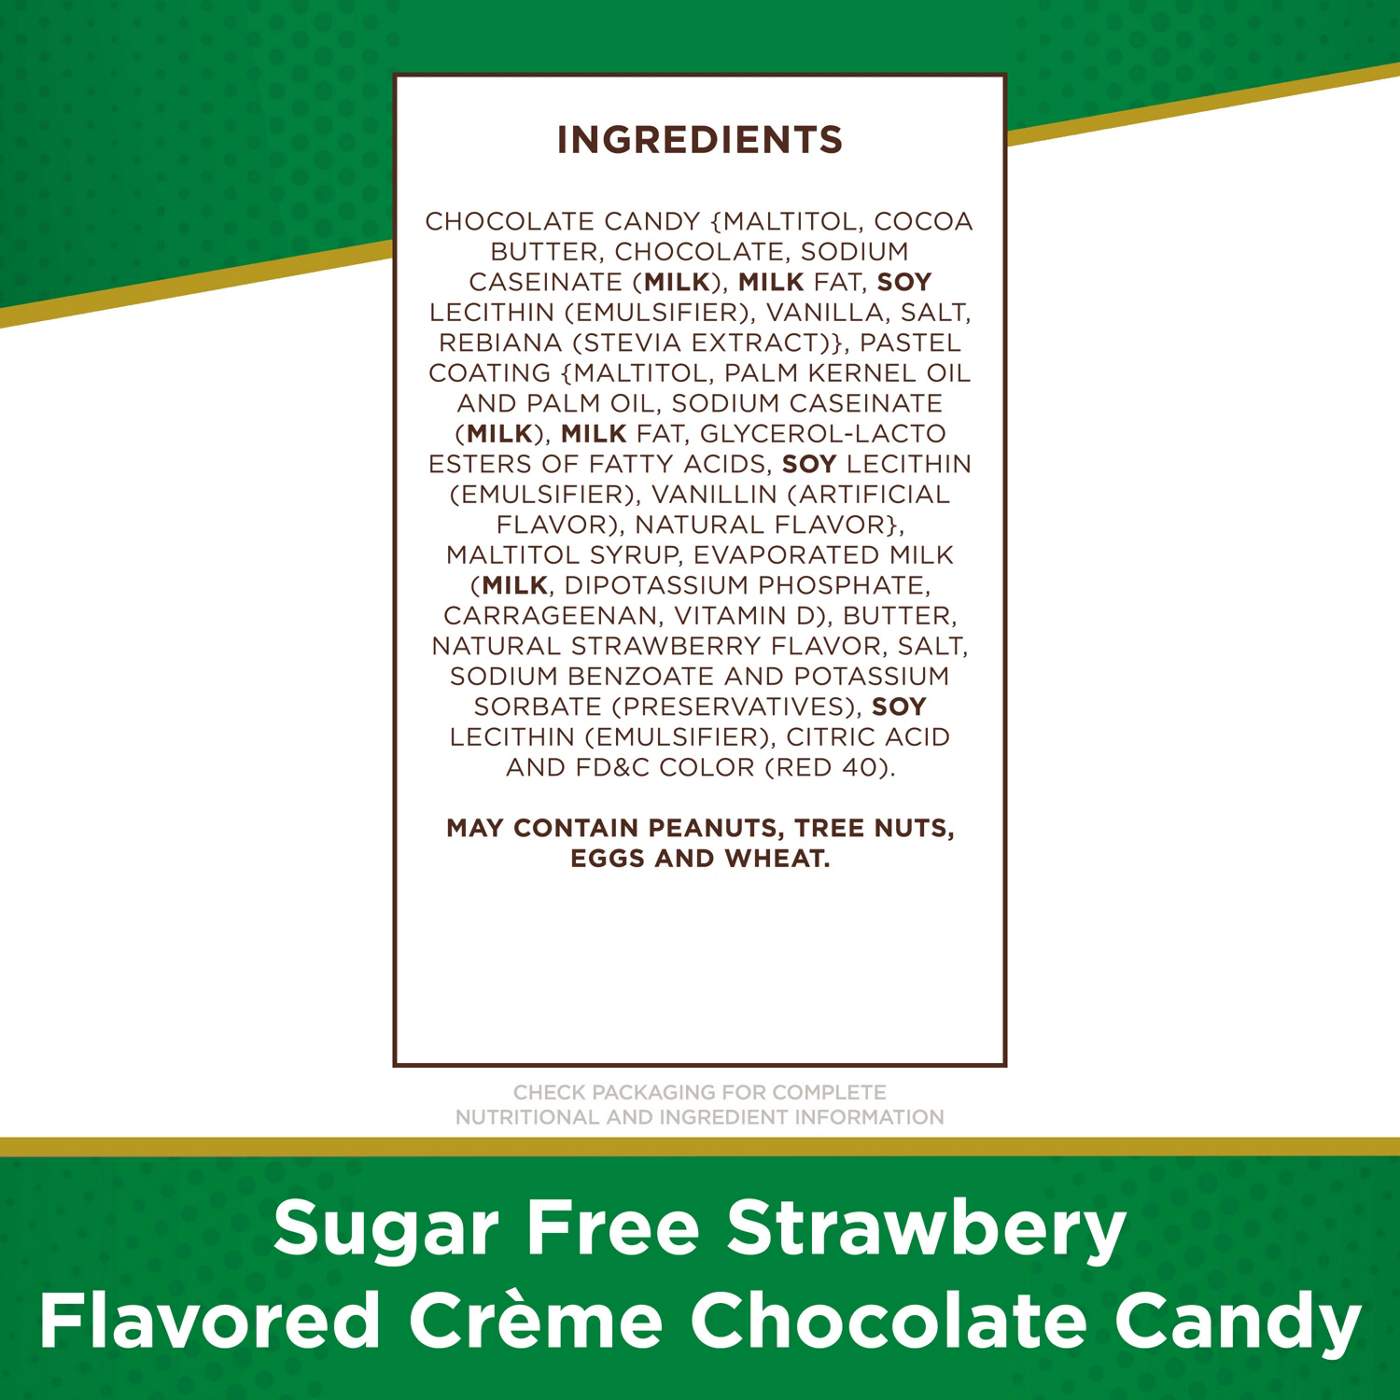 Russell Stover Sugar Free Strawberry Creme Chocolate Candy; image 6 of 8